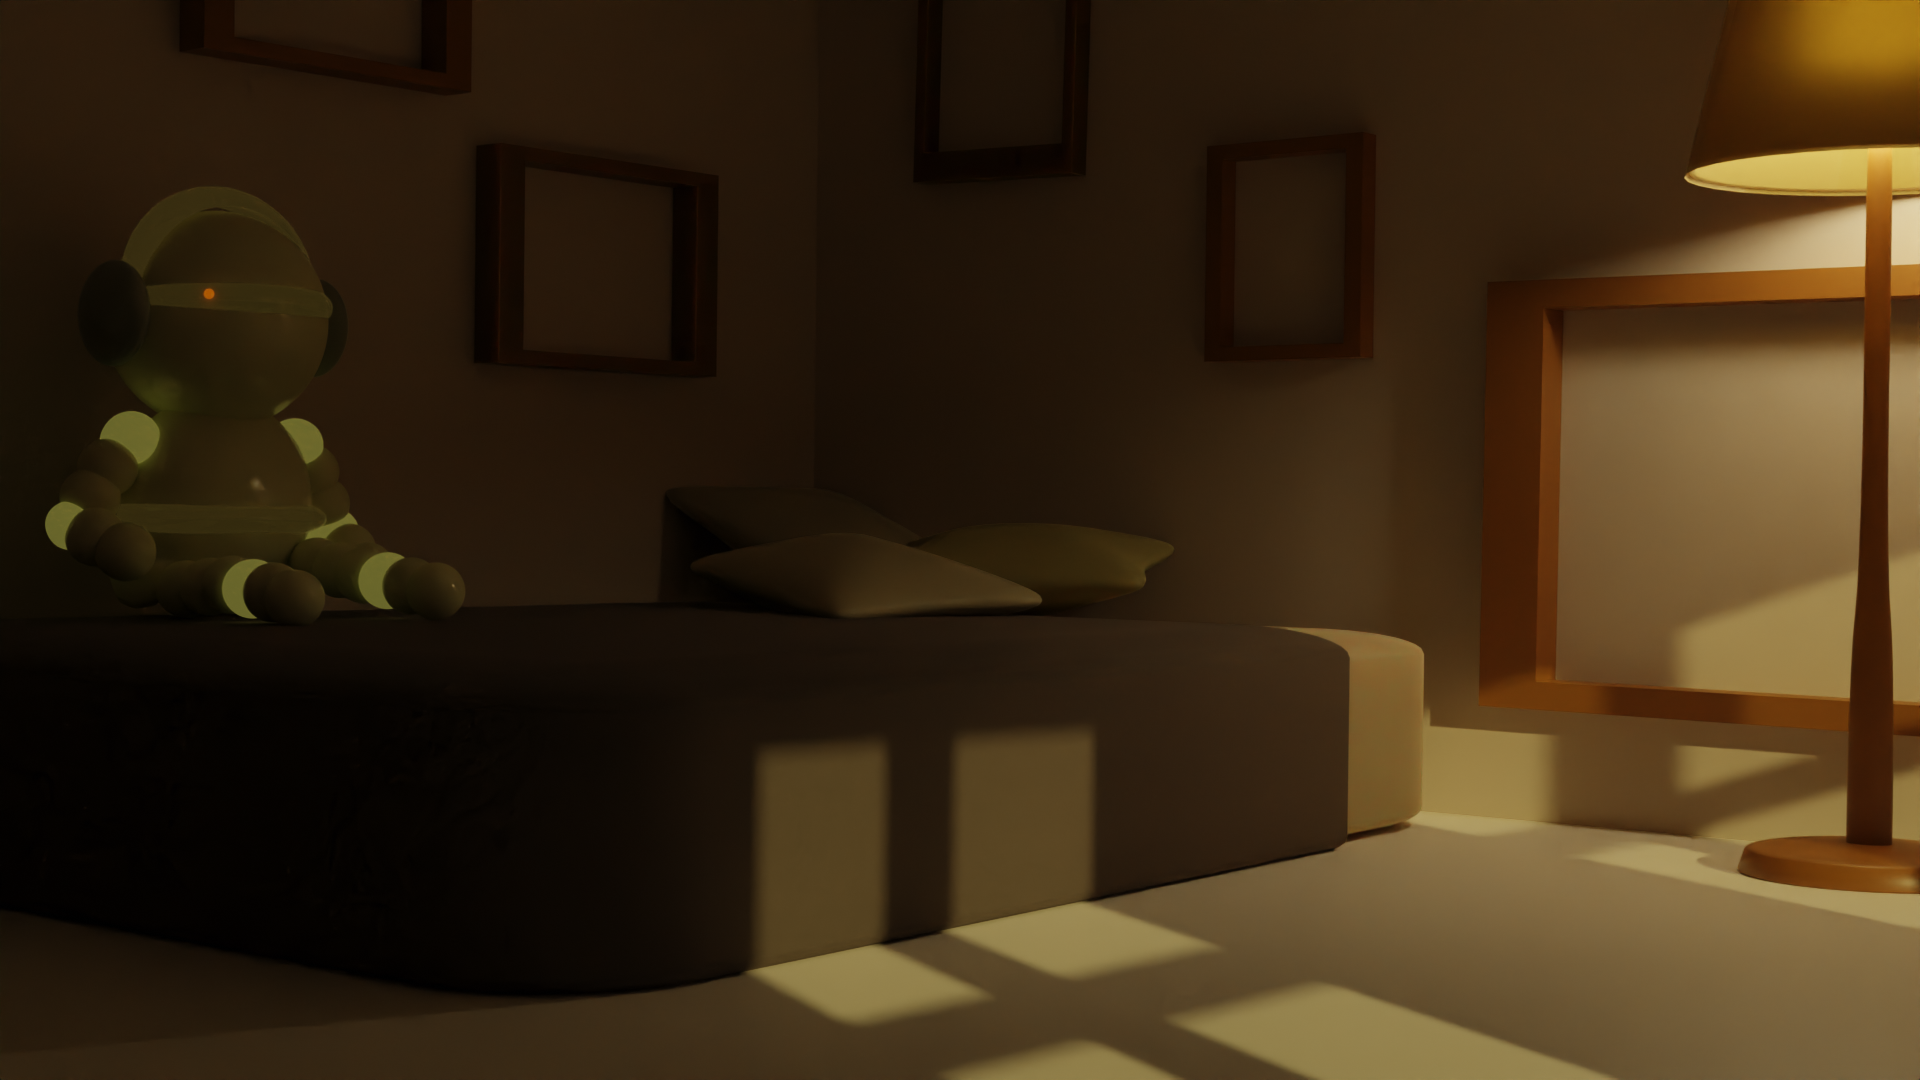 a 3d render of a robot sitting on a bed